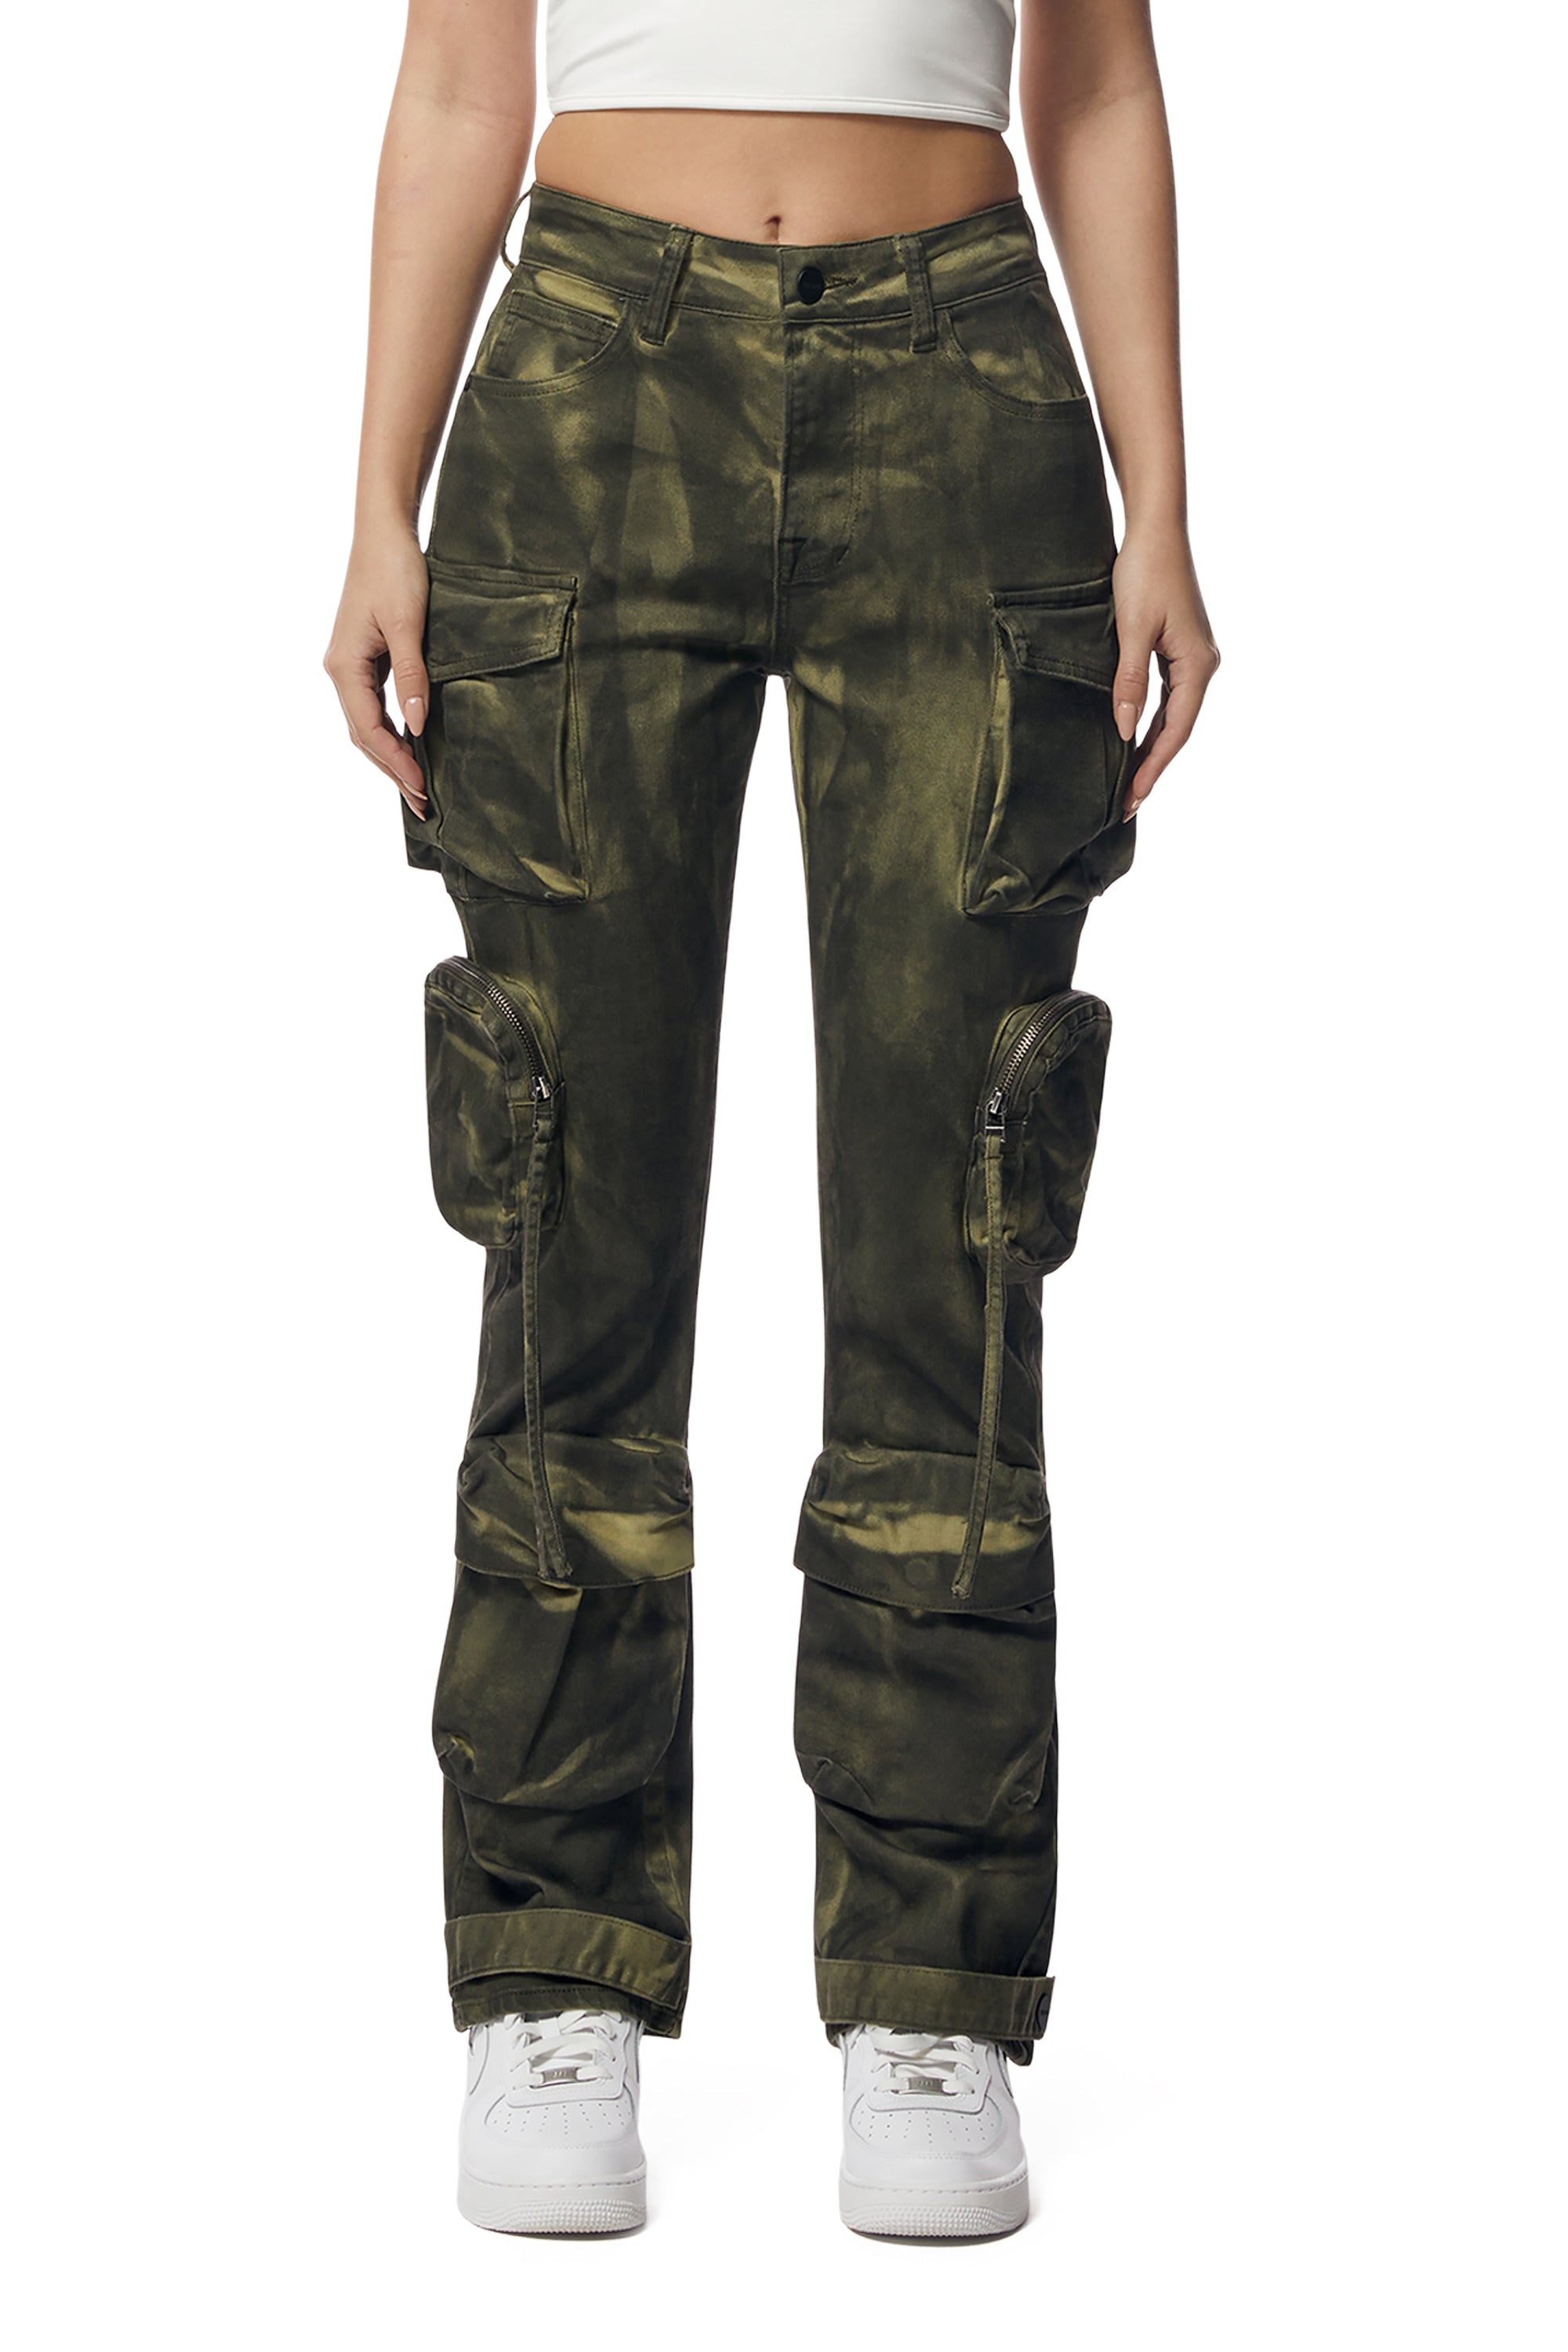 Pigment Dyed Utility Twill Pants - Clover Green